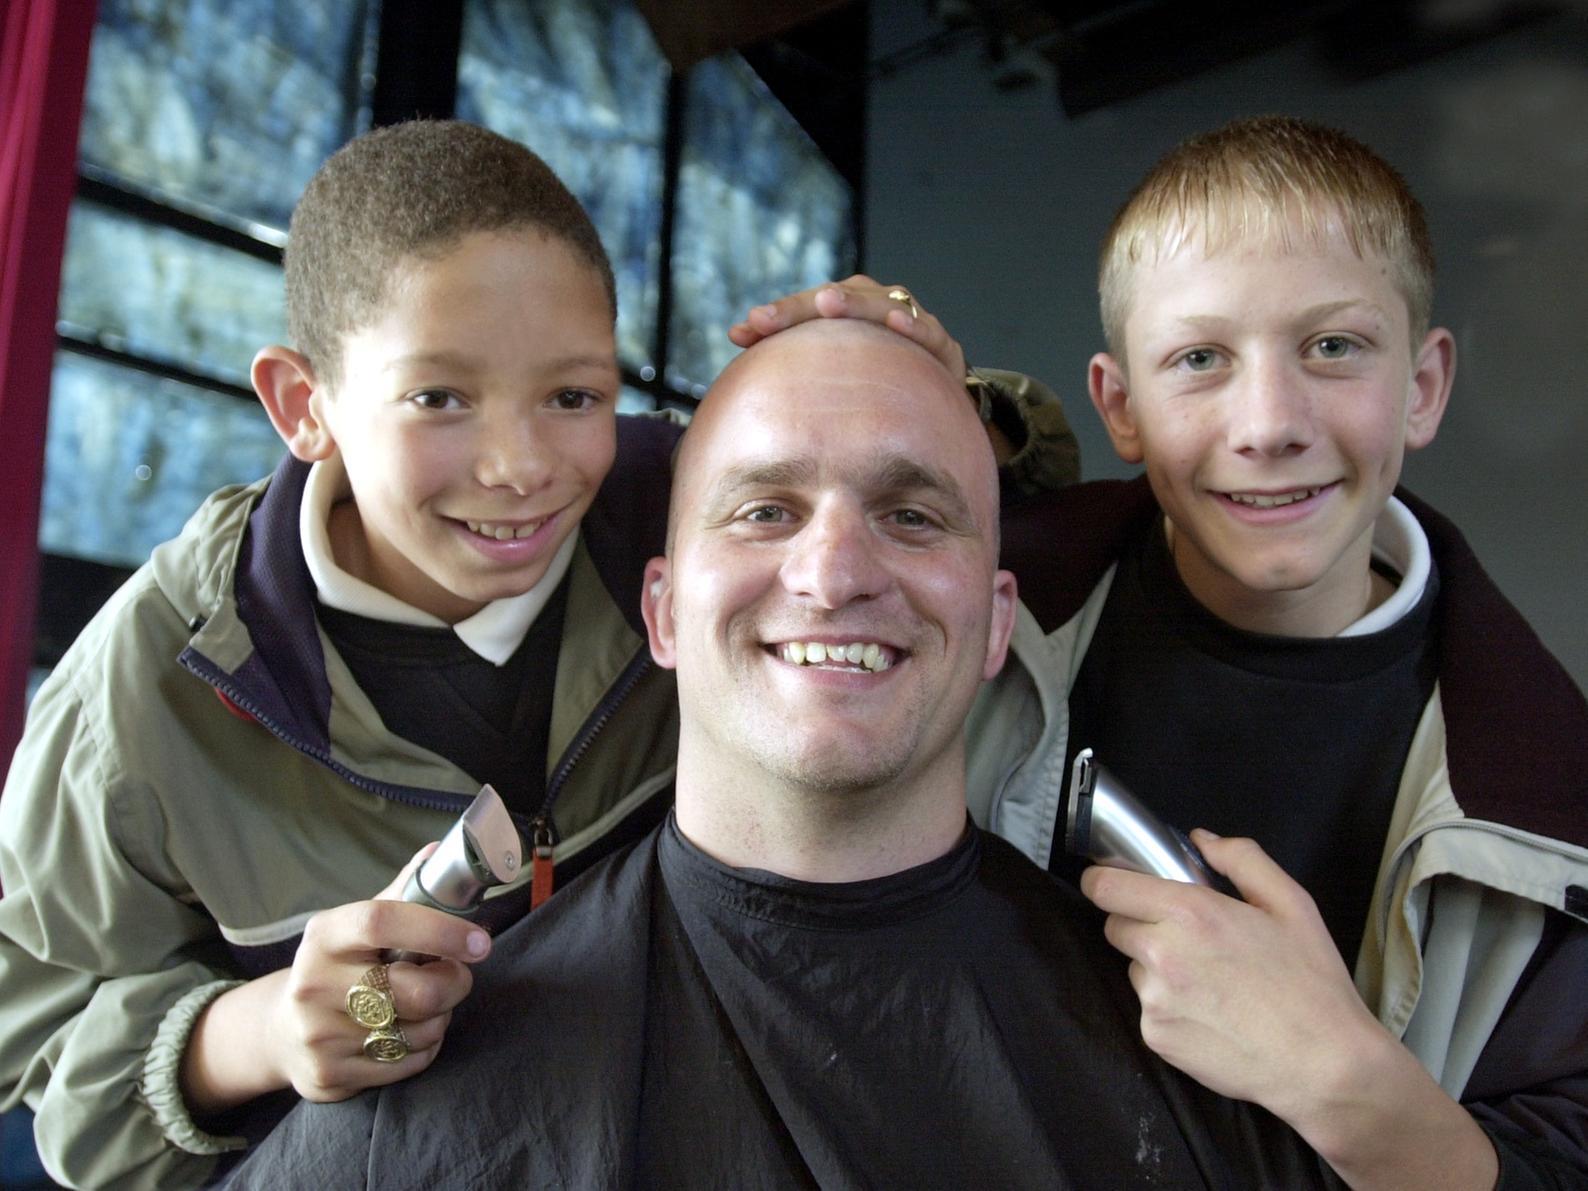 Jason Kennerlley has his head shaved with the help of Carl Tudor and Sam Fella to raise funds for the school's rugby tour.